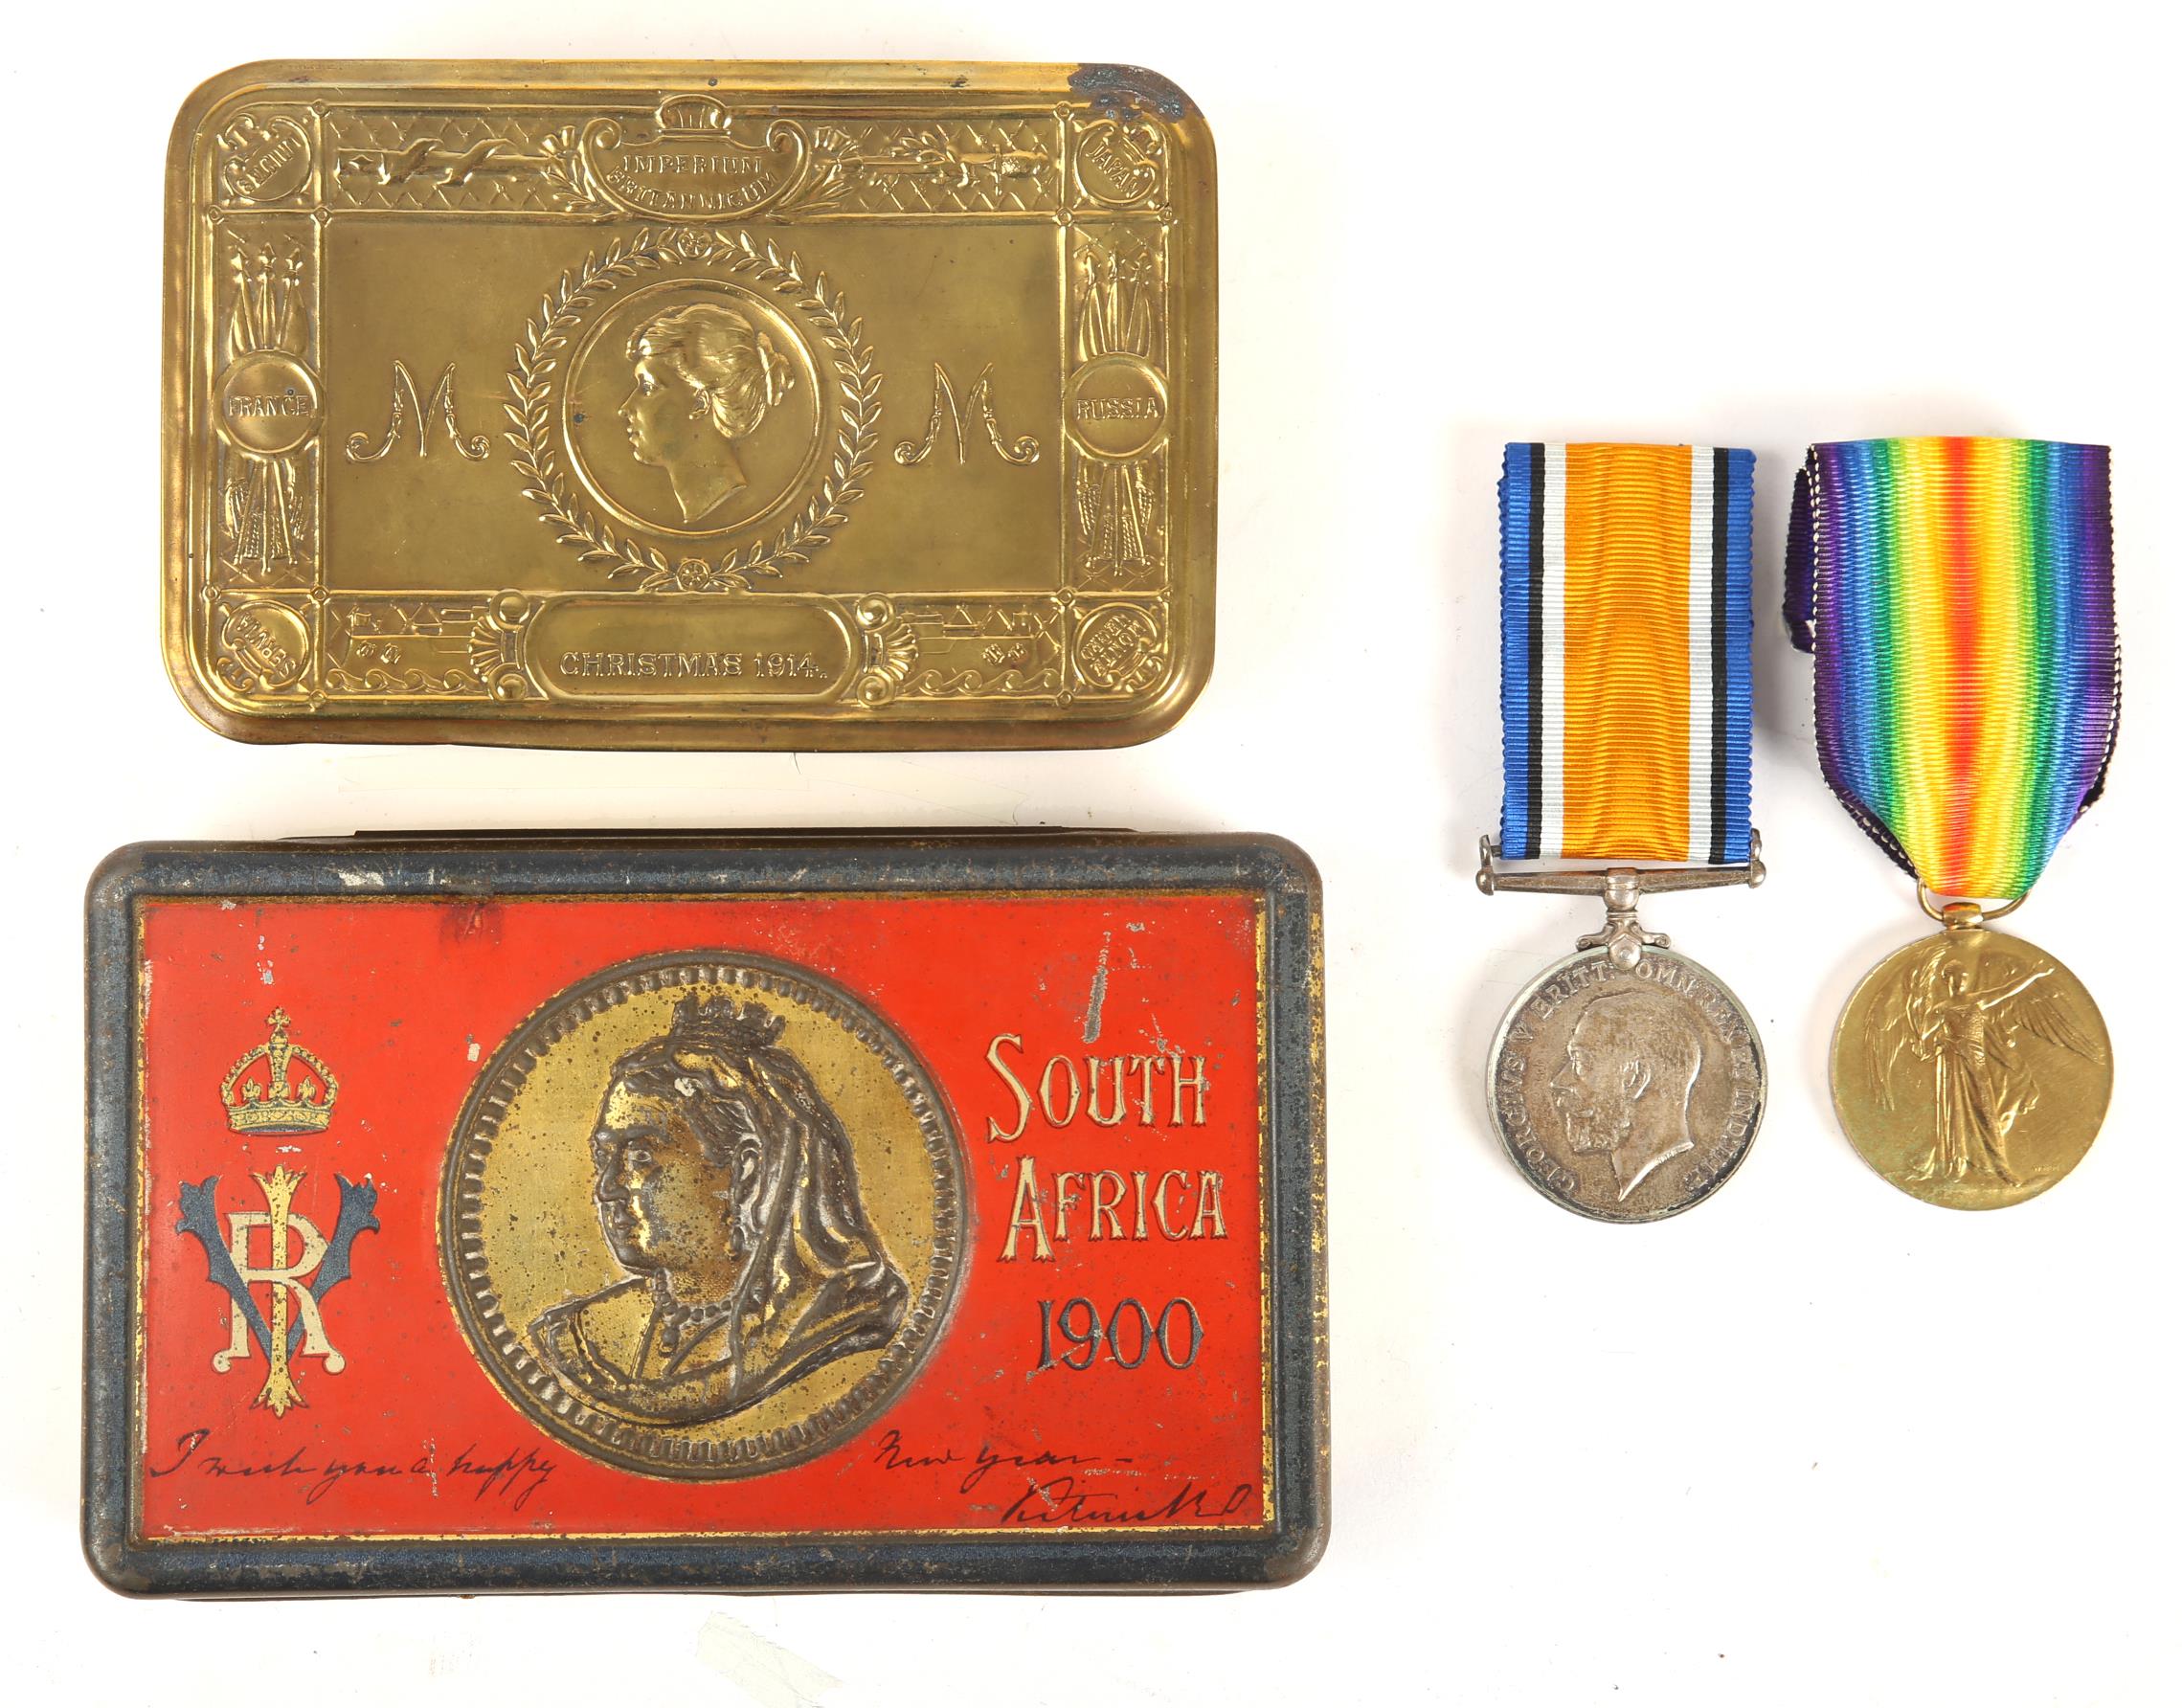 1914-1918 Great War pair, British war Medal and Victory Medal to T4-160694 DVR. H. C. GIFFORD;